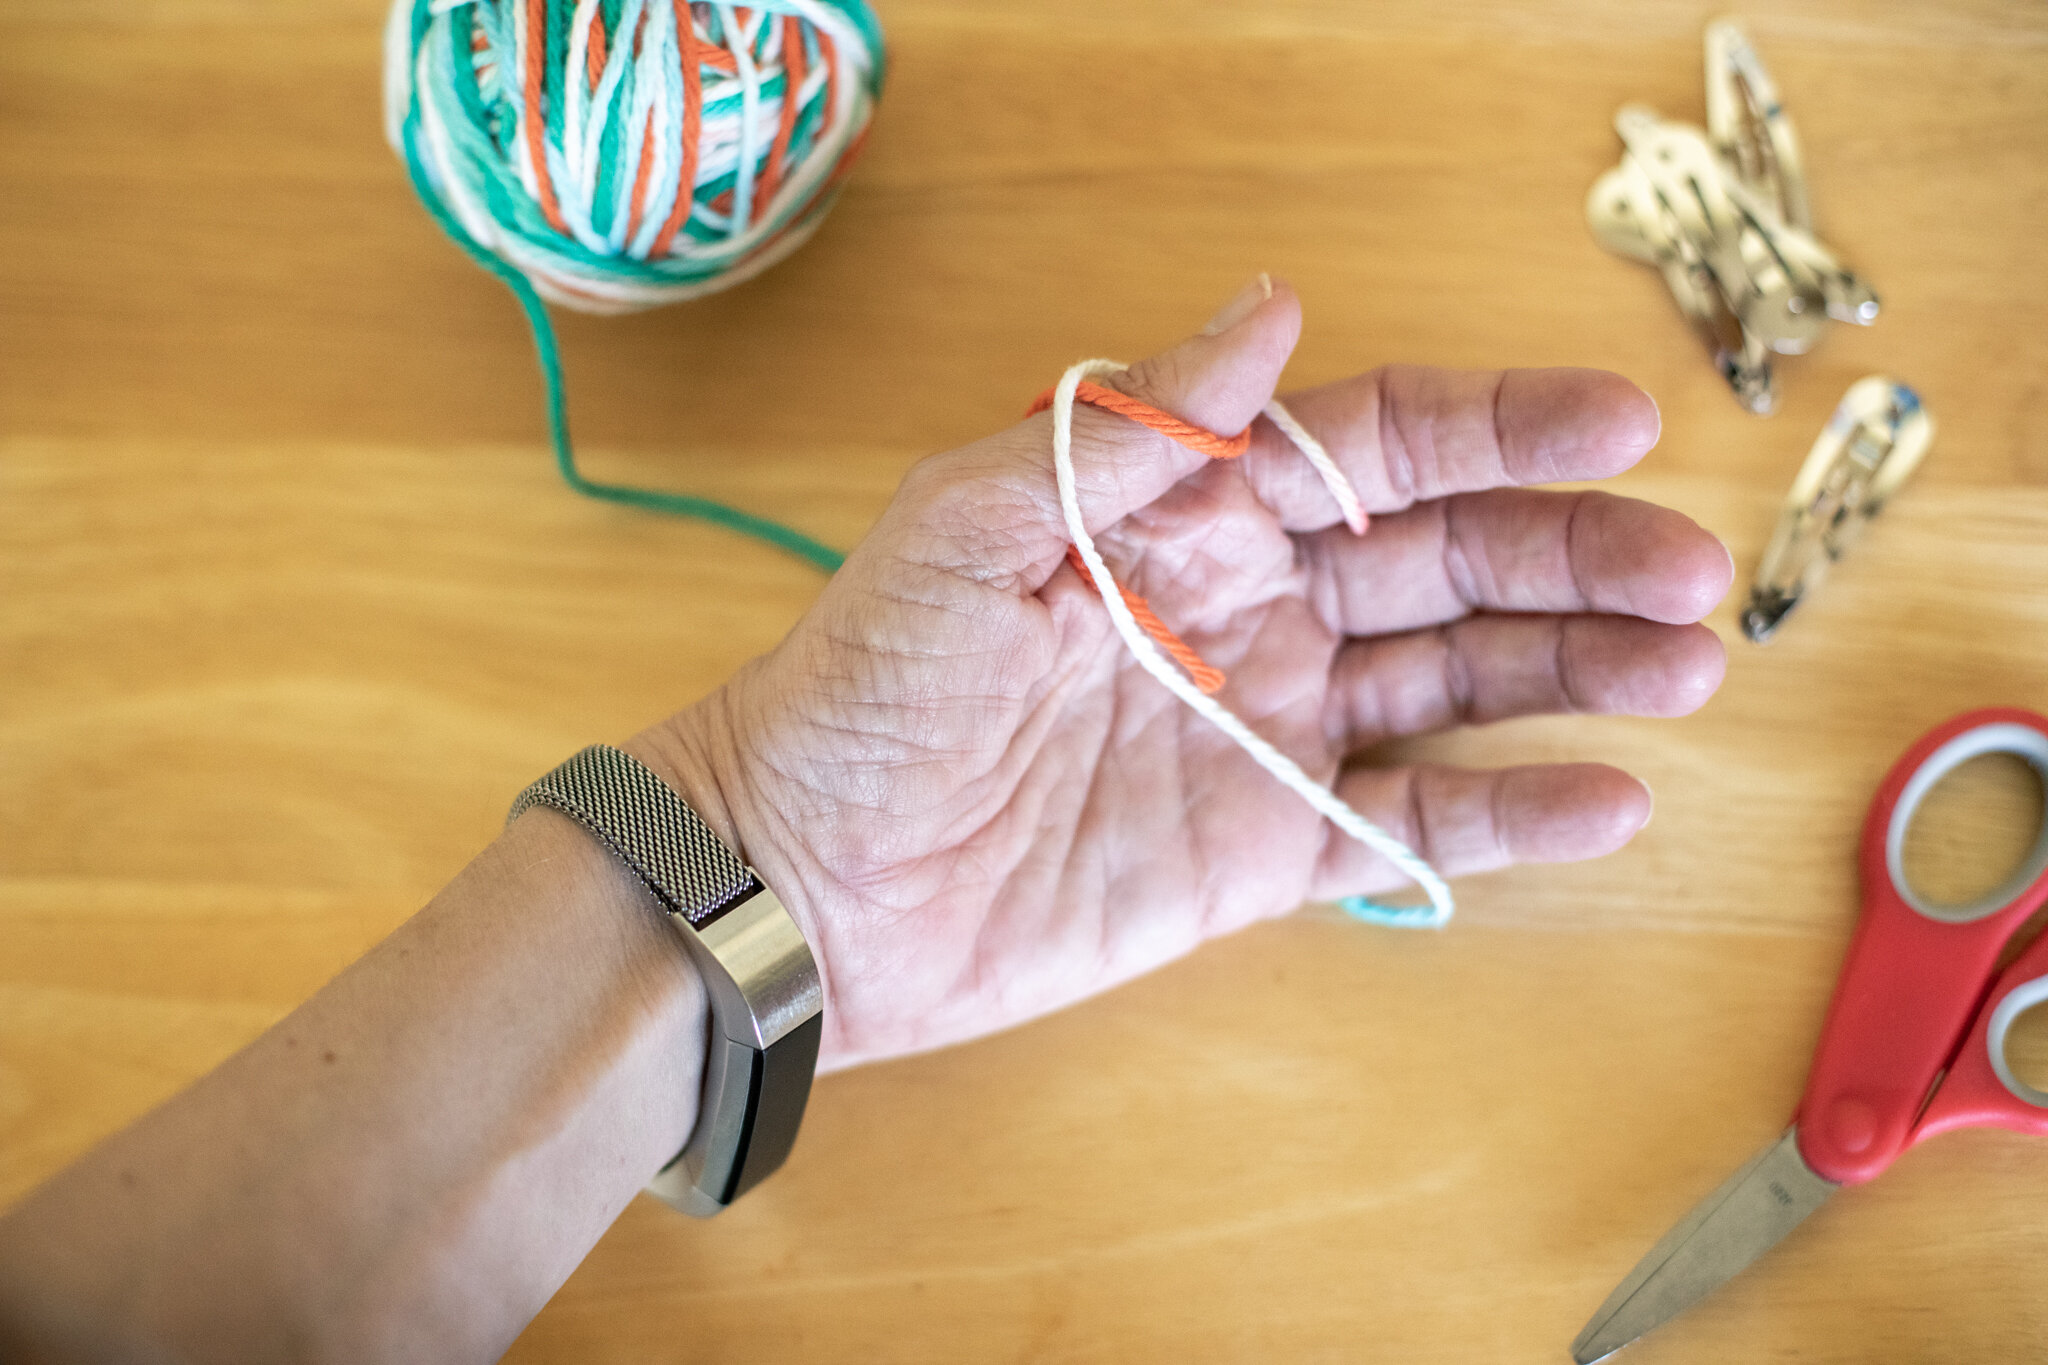  Keep the yarn a little loose (otherwise you might be wearing it forever). You will need to slip it off of your fingers at one point. Wrap the yarn around your thumb. Don’t let go of the “tail”. You should have two rings started on your thumb and fin